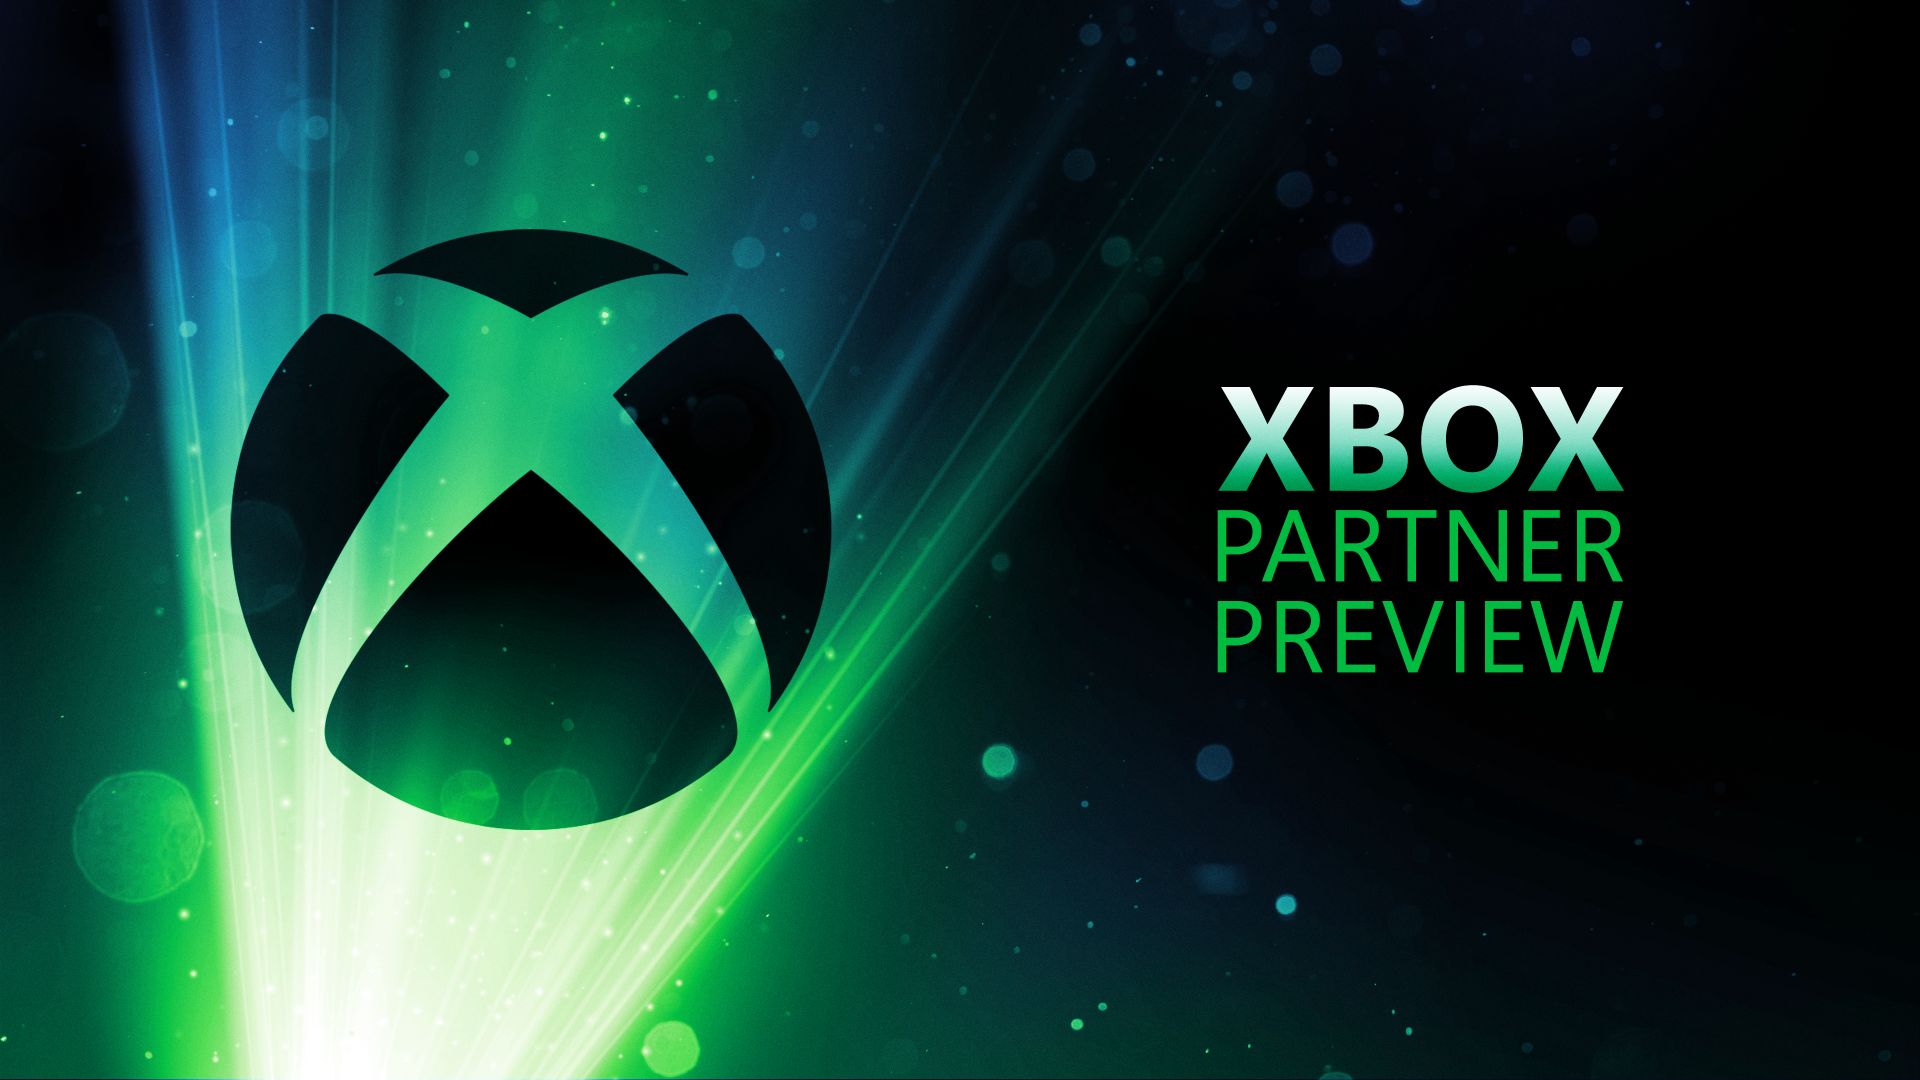 Xbox Partner Preview: A Sneak Peek into Upcoming Games